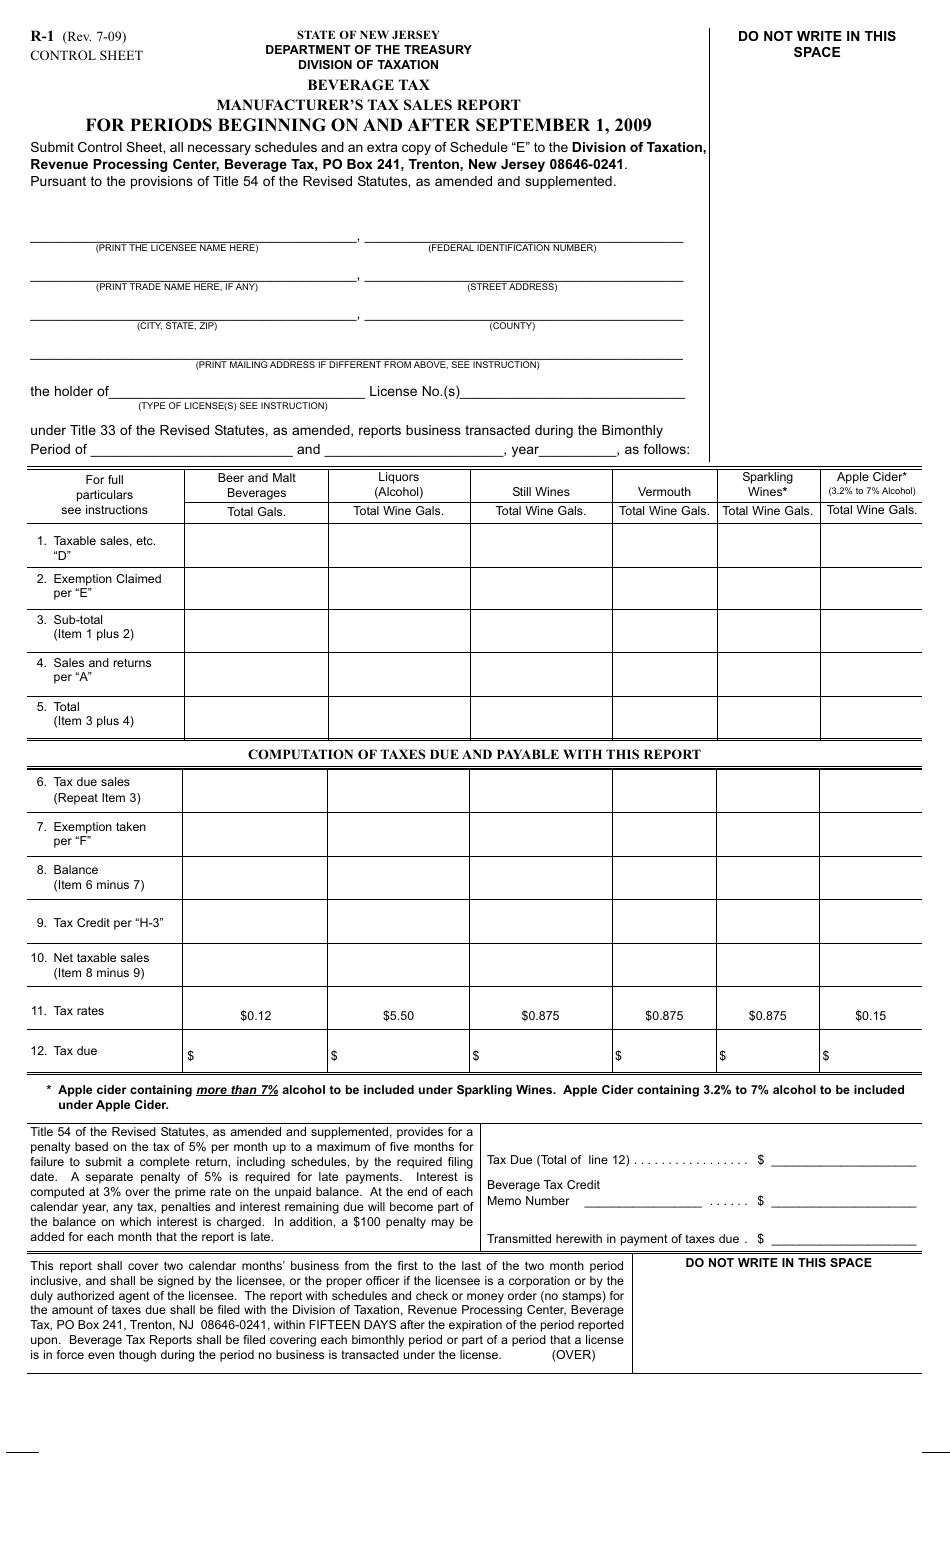 Form R-1 Beverage Tax - Manufacturers Tax Sales Report -periods Beginning on and After September 2009 - New Jersey, Page 1